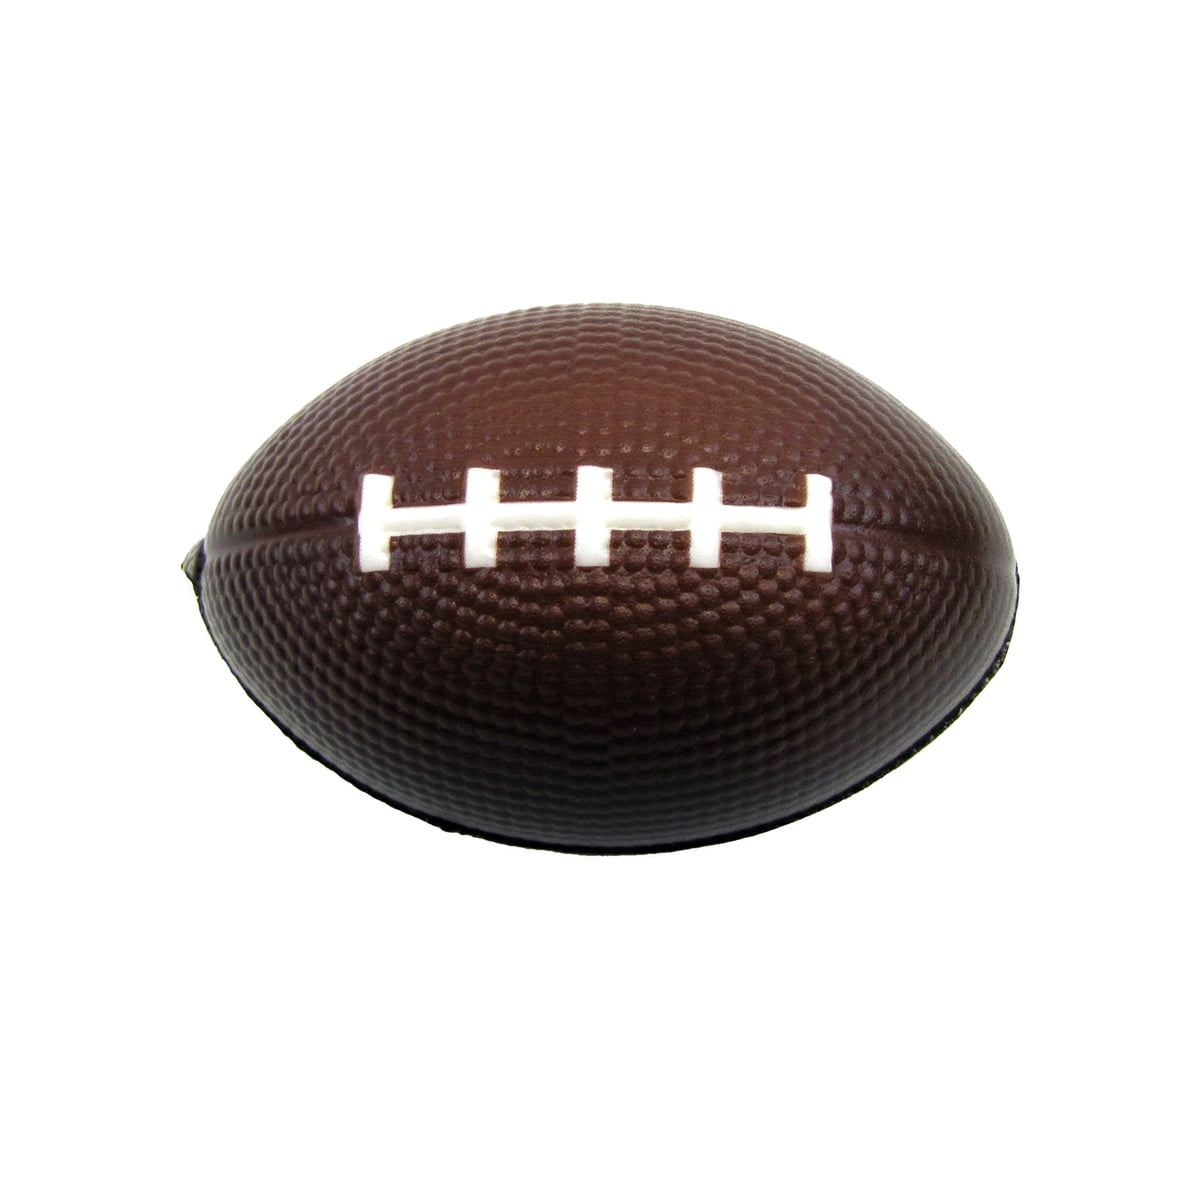 Mini Football Foam Squeeze Toy Sensory Stress Ball Sport Anxiety Relief Squish 